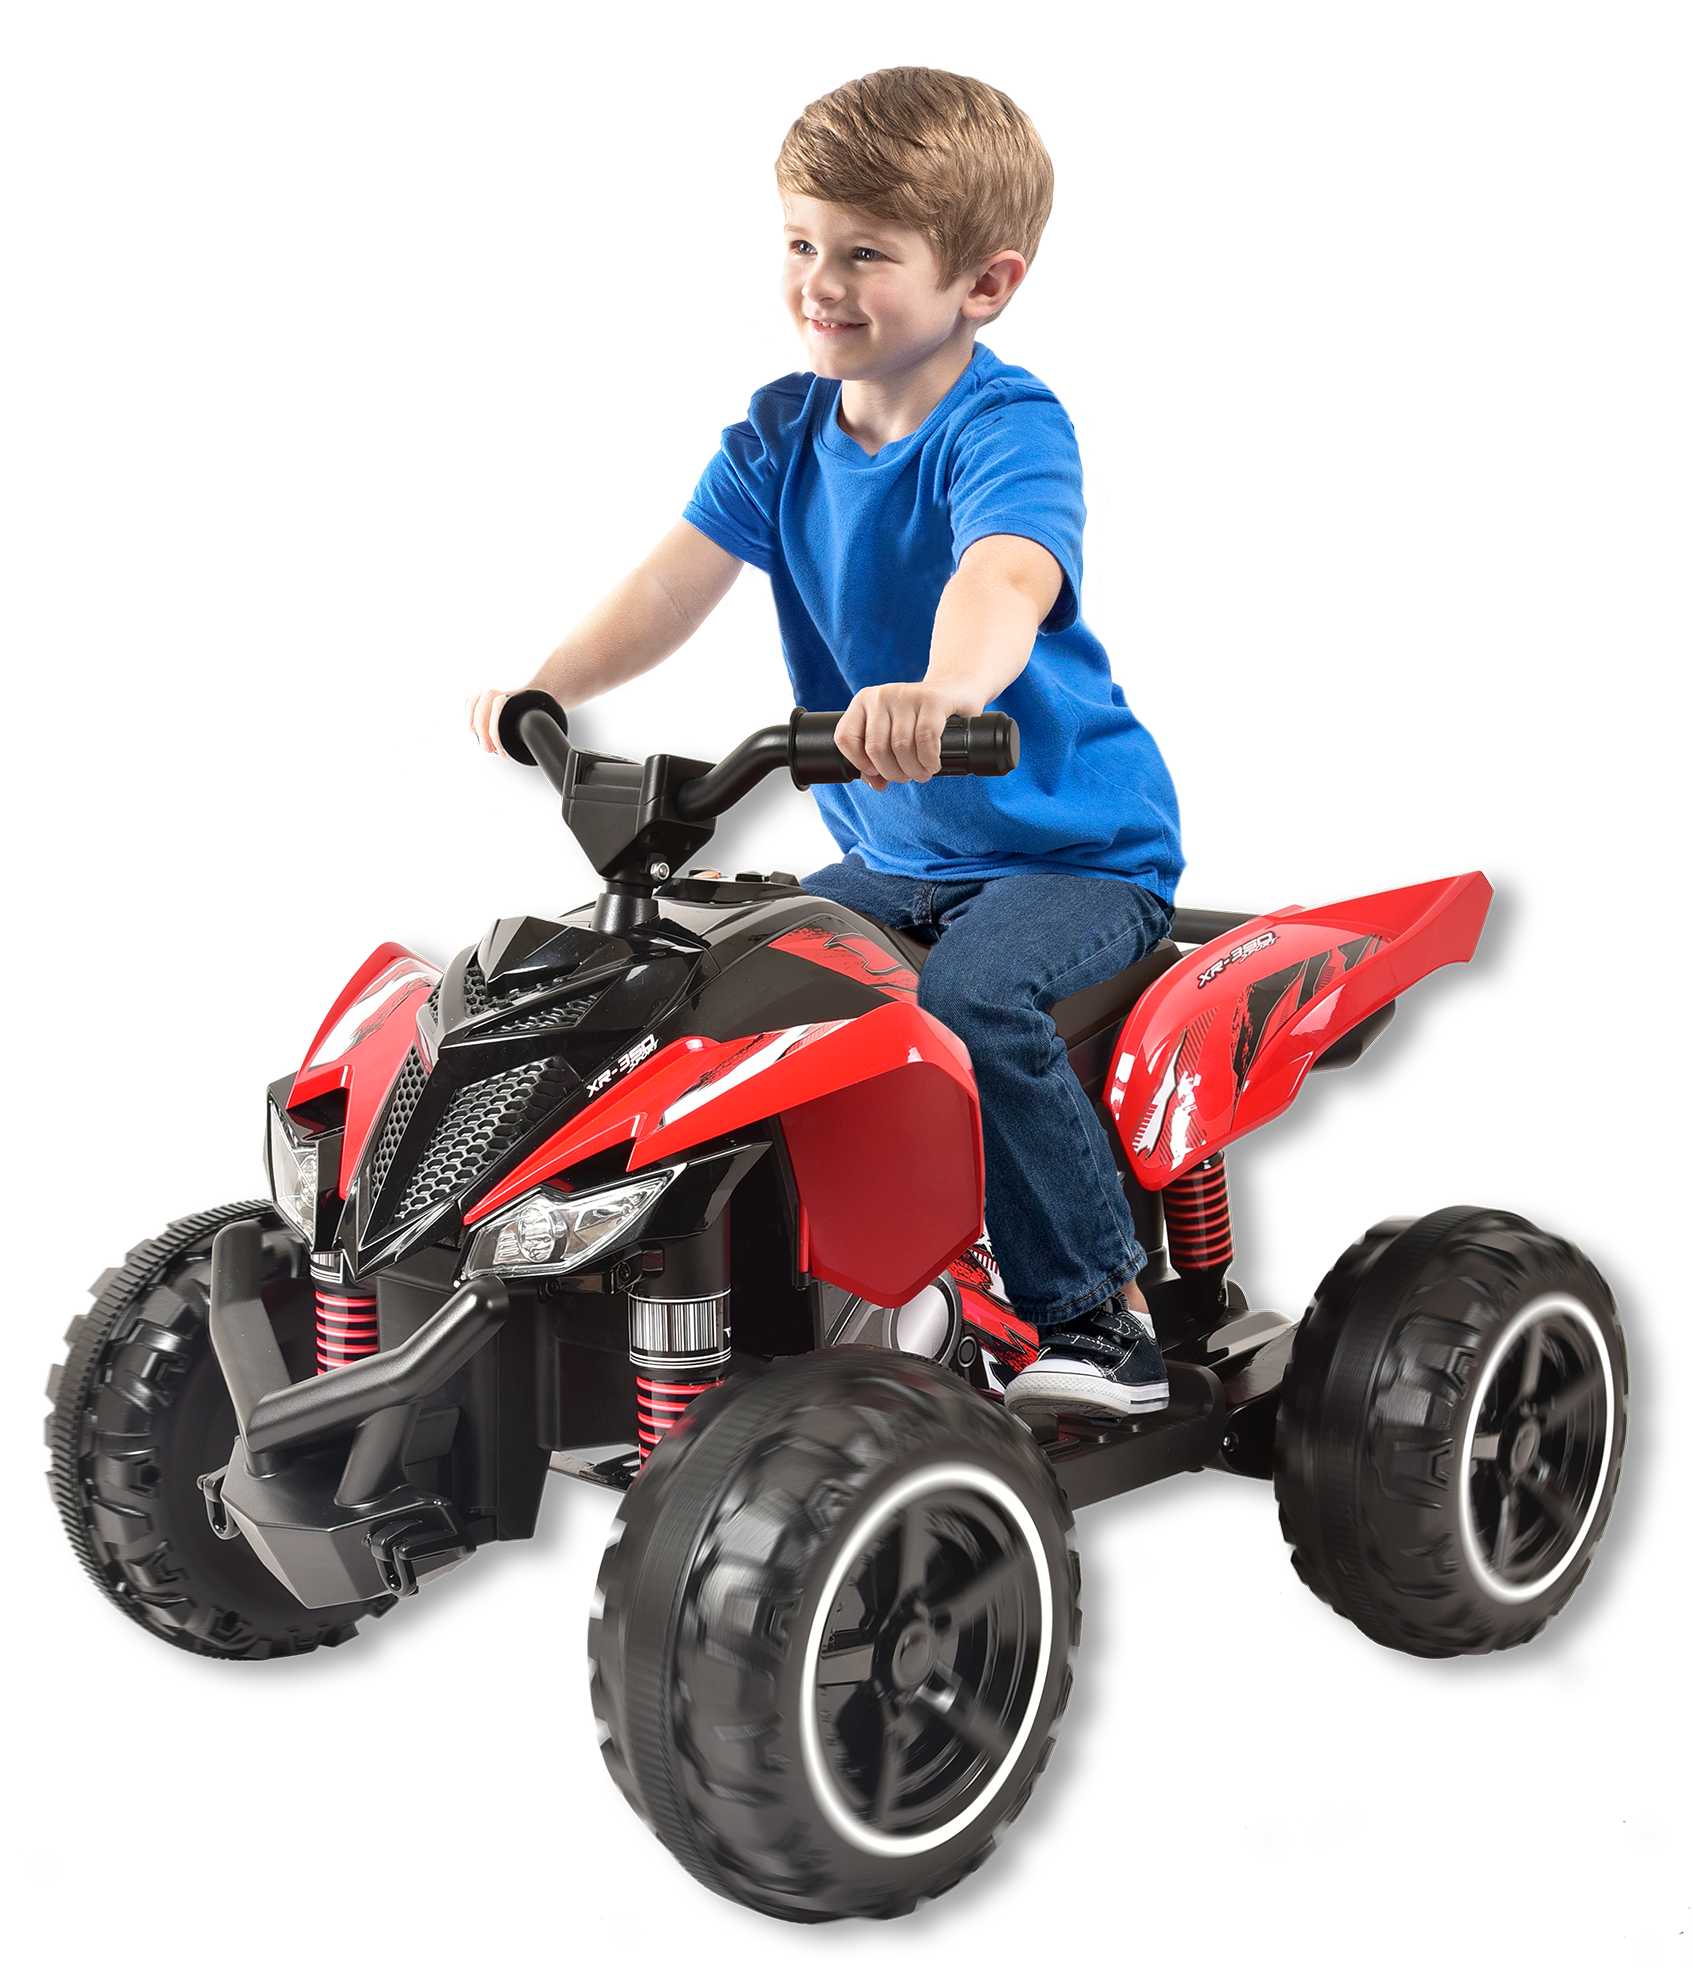 12V XR-350 ATV Powered Ride-on by Action Wheels, Red, for Children, Unisex, Ages 2-4 Years Old - image 2 of 26